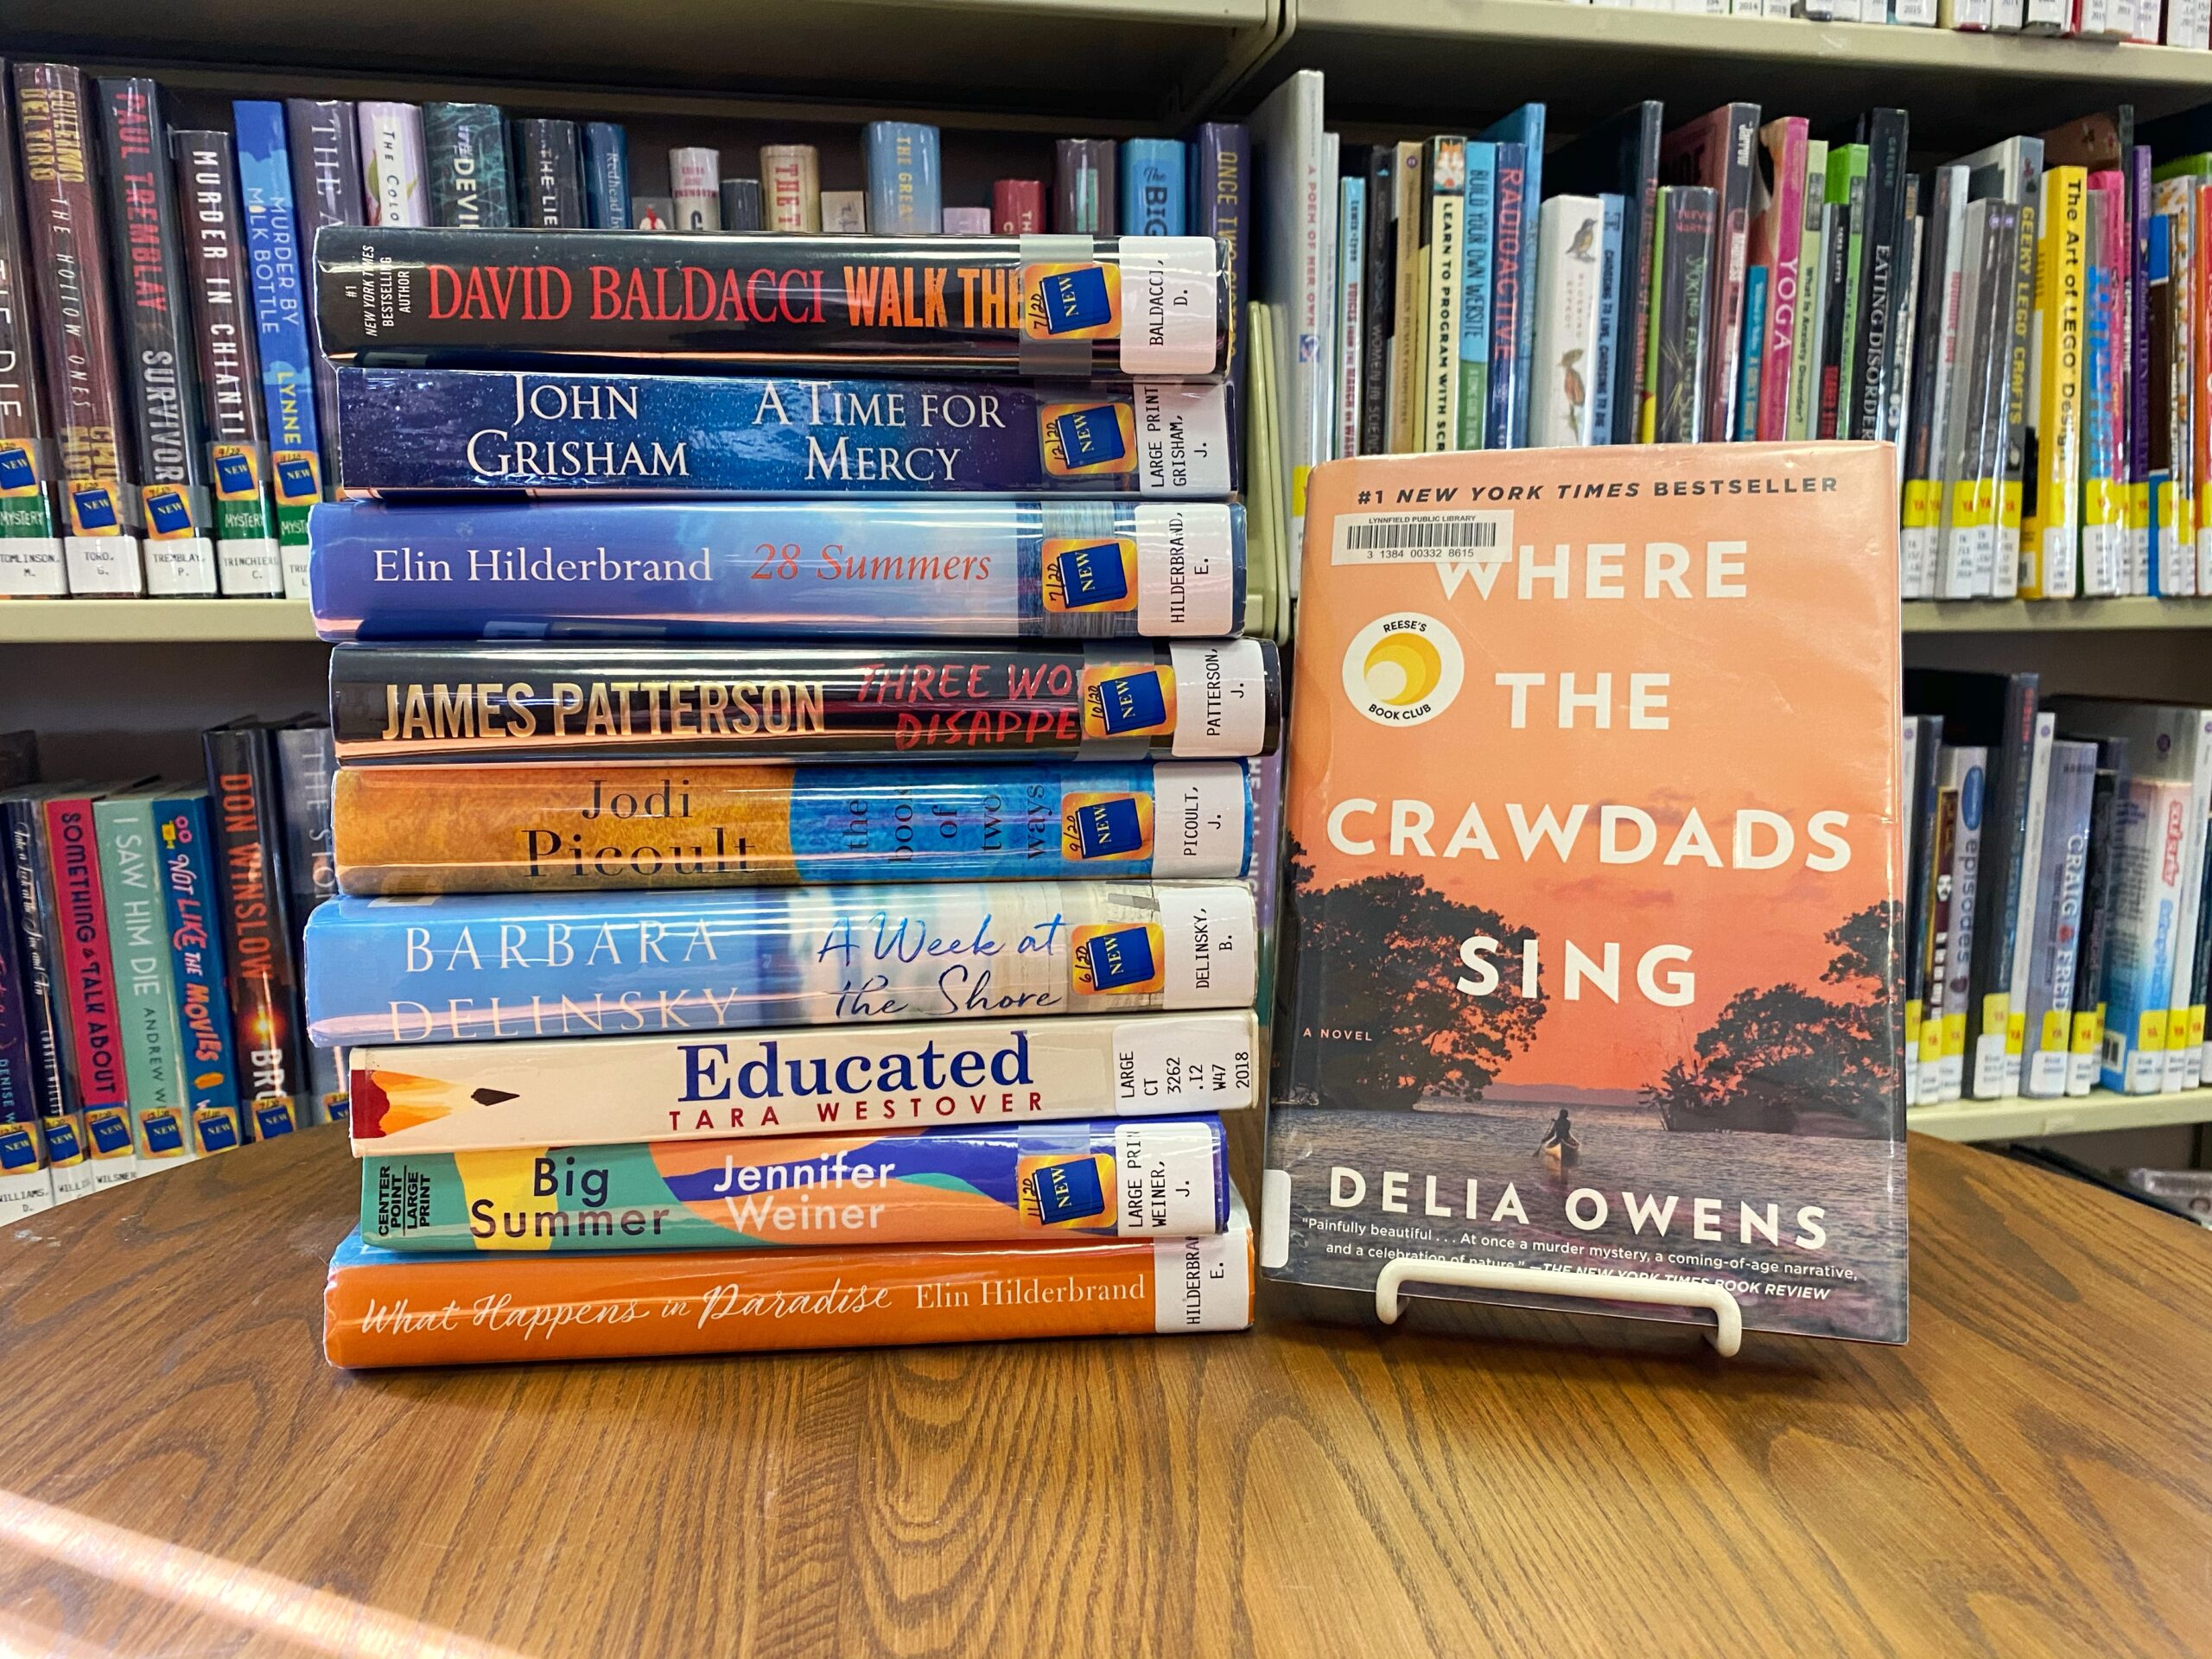 A stack of books from the blog post list on a table. Where the Crawdads Sing faces the camera.